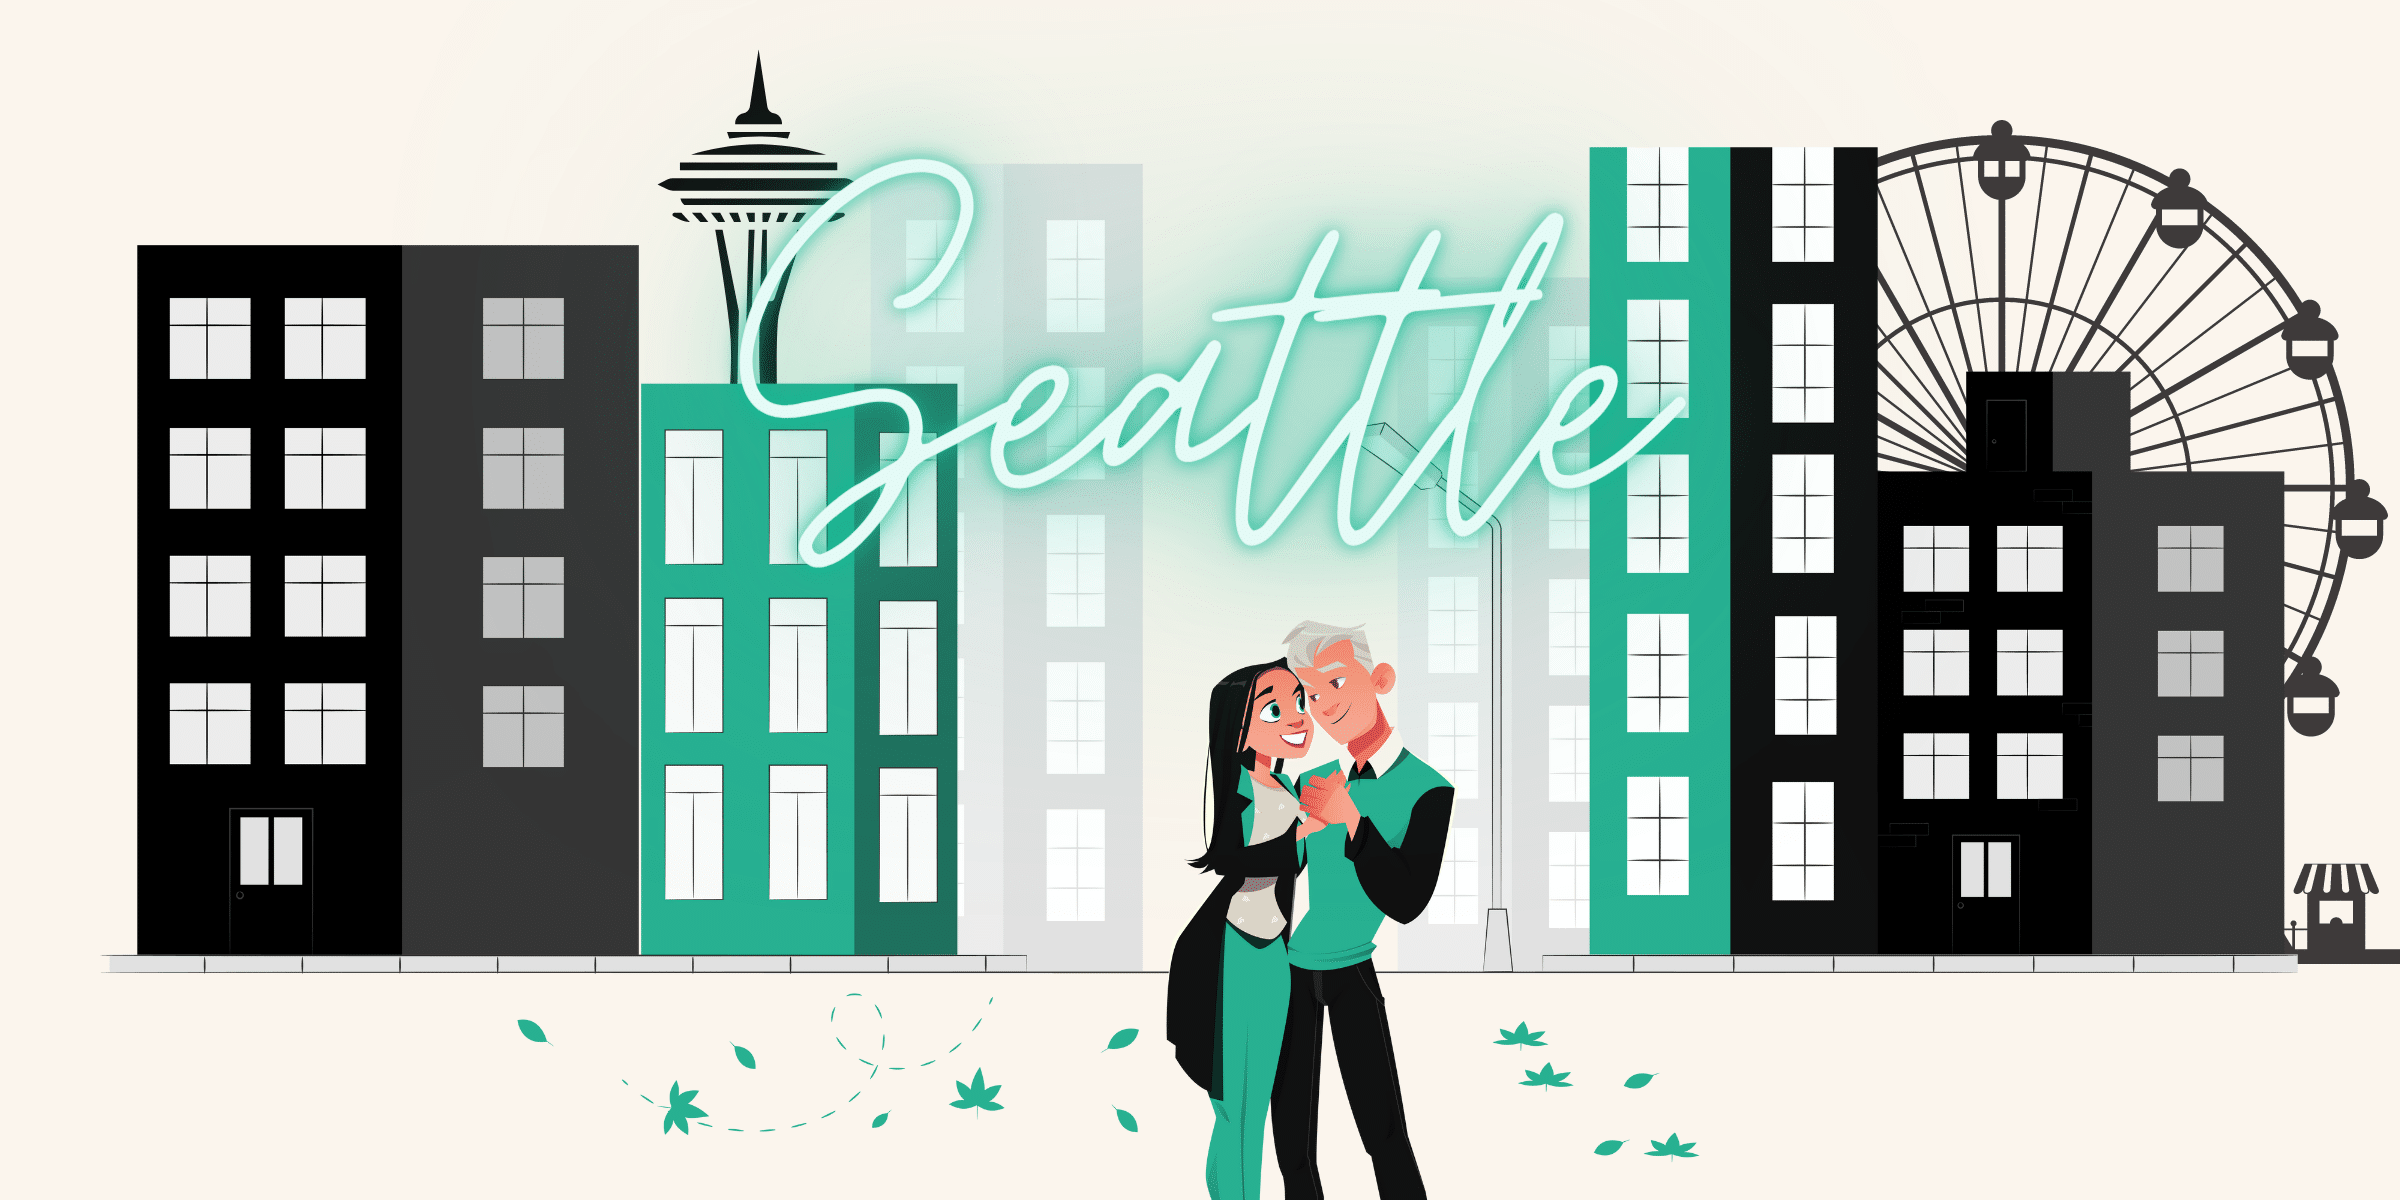 Finding unique date spots in Seattle can be tricky, but we’ve got you covered. Check out our favorite date ideas in Seattle just for you!